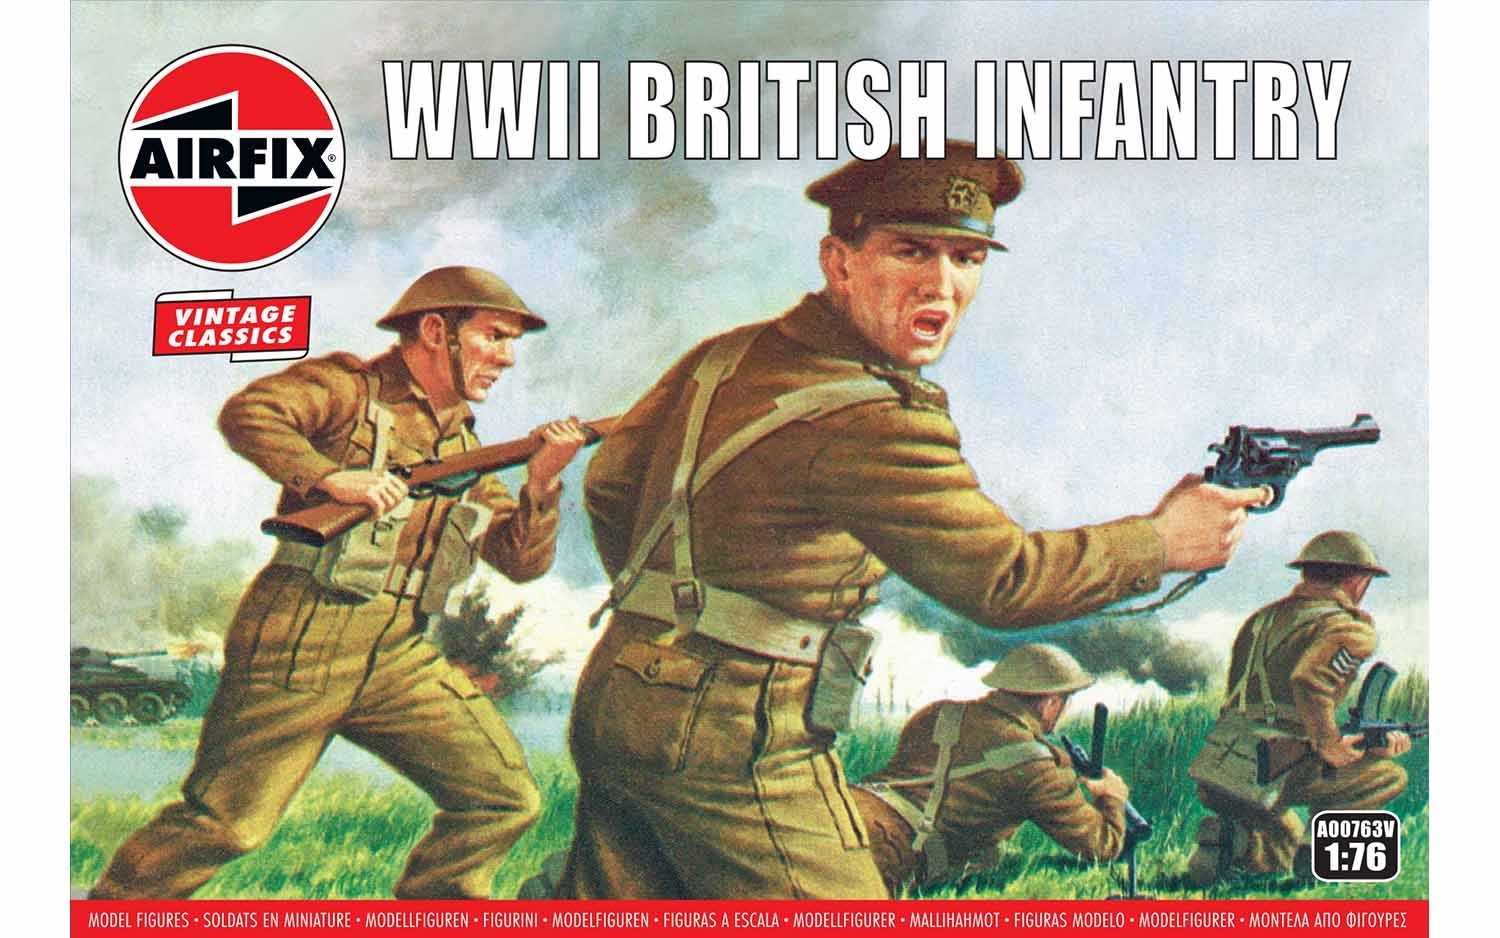 Airfix Classic Kit VINTAGE figurky A00763V - WWII British Infantry (1:76)